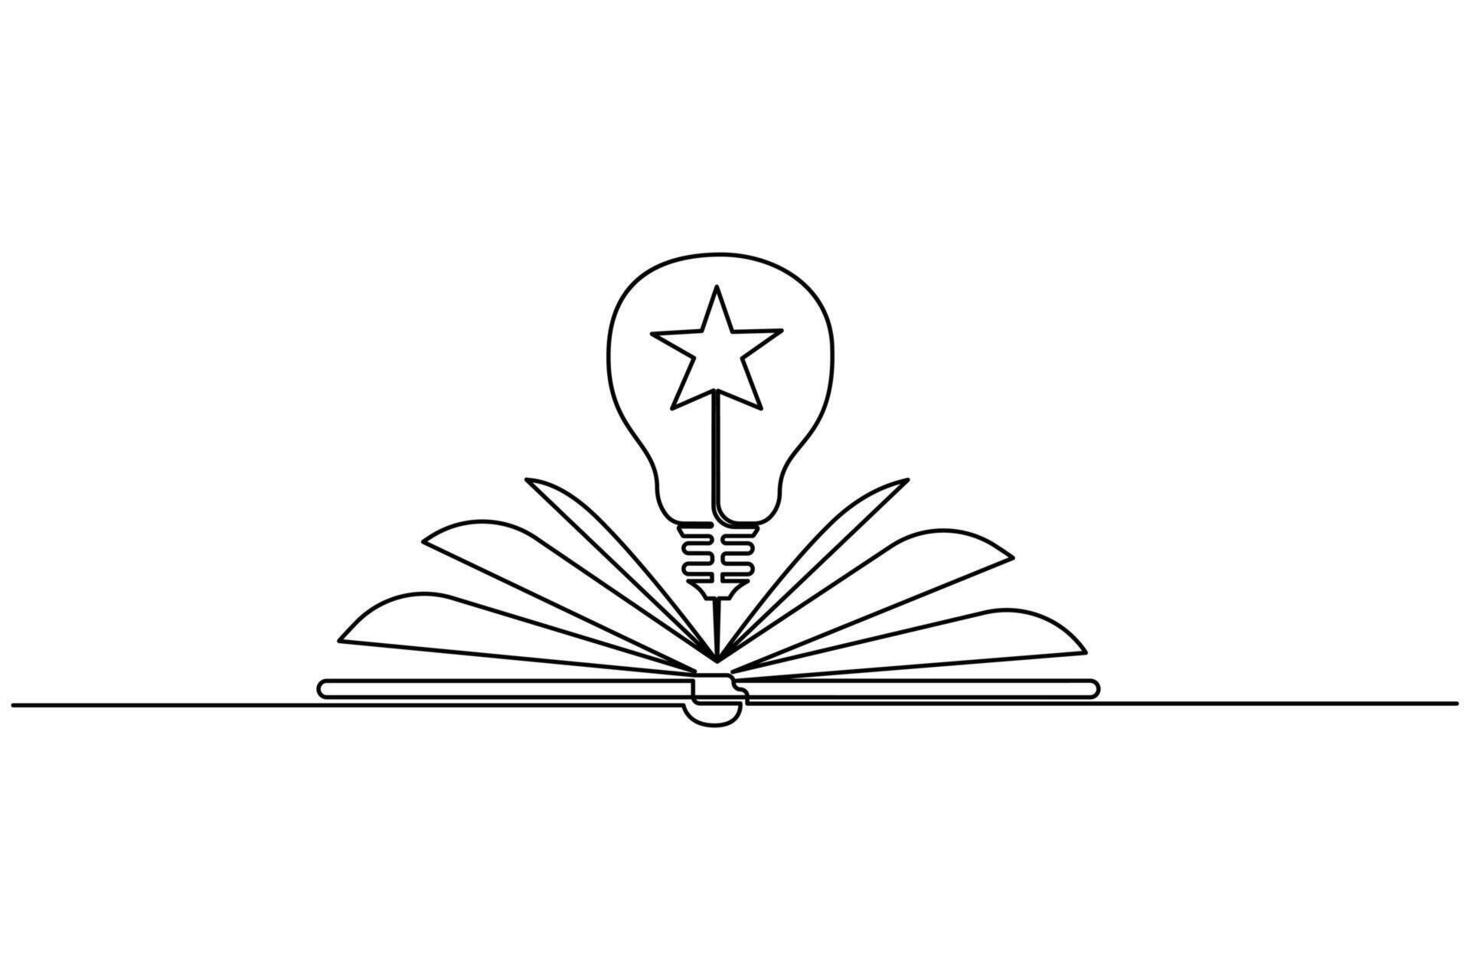 Continuous one line open book  of shining light bulb above open text book world educational knowledge concept vector